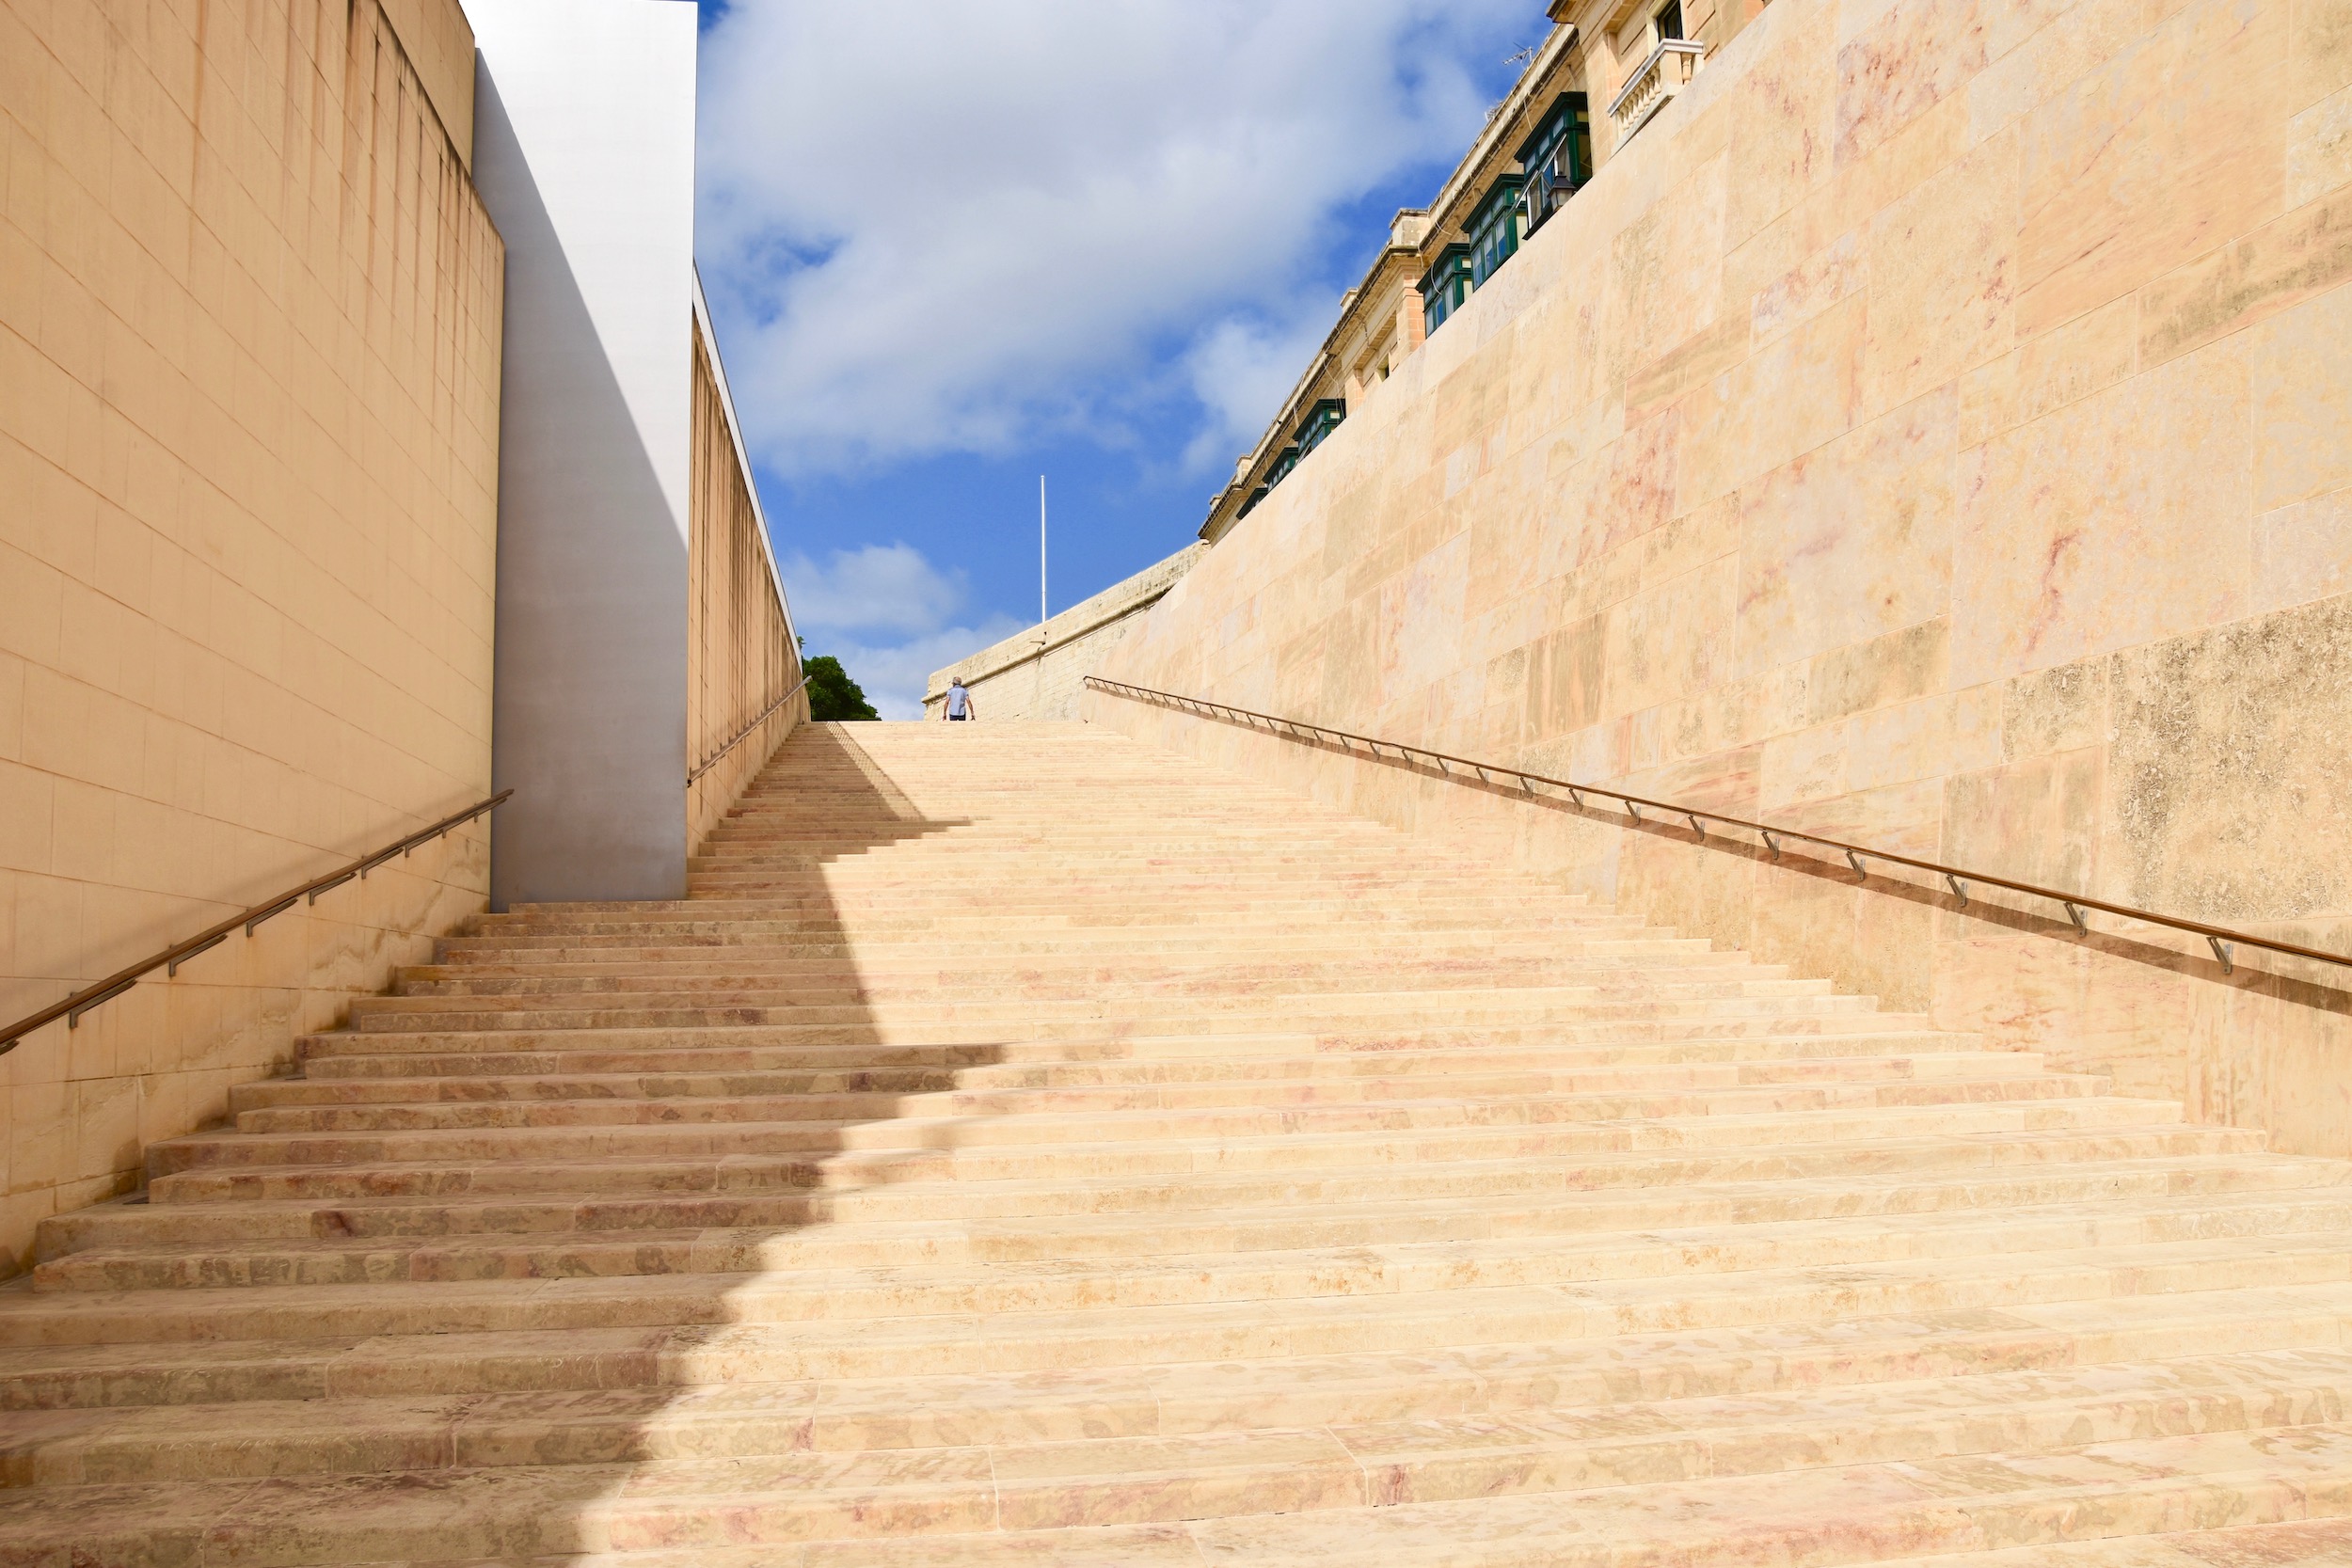 Stairs to St. Michael's Bastion, Valletta